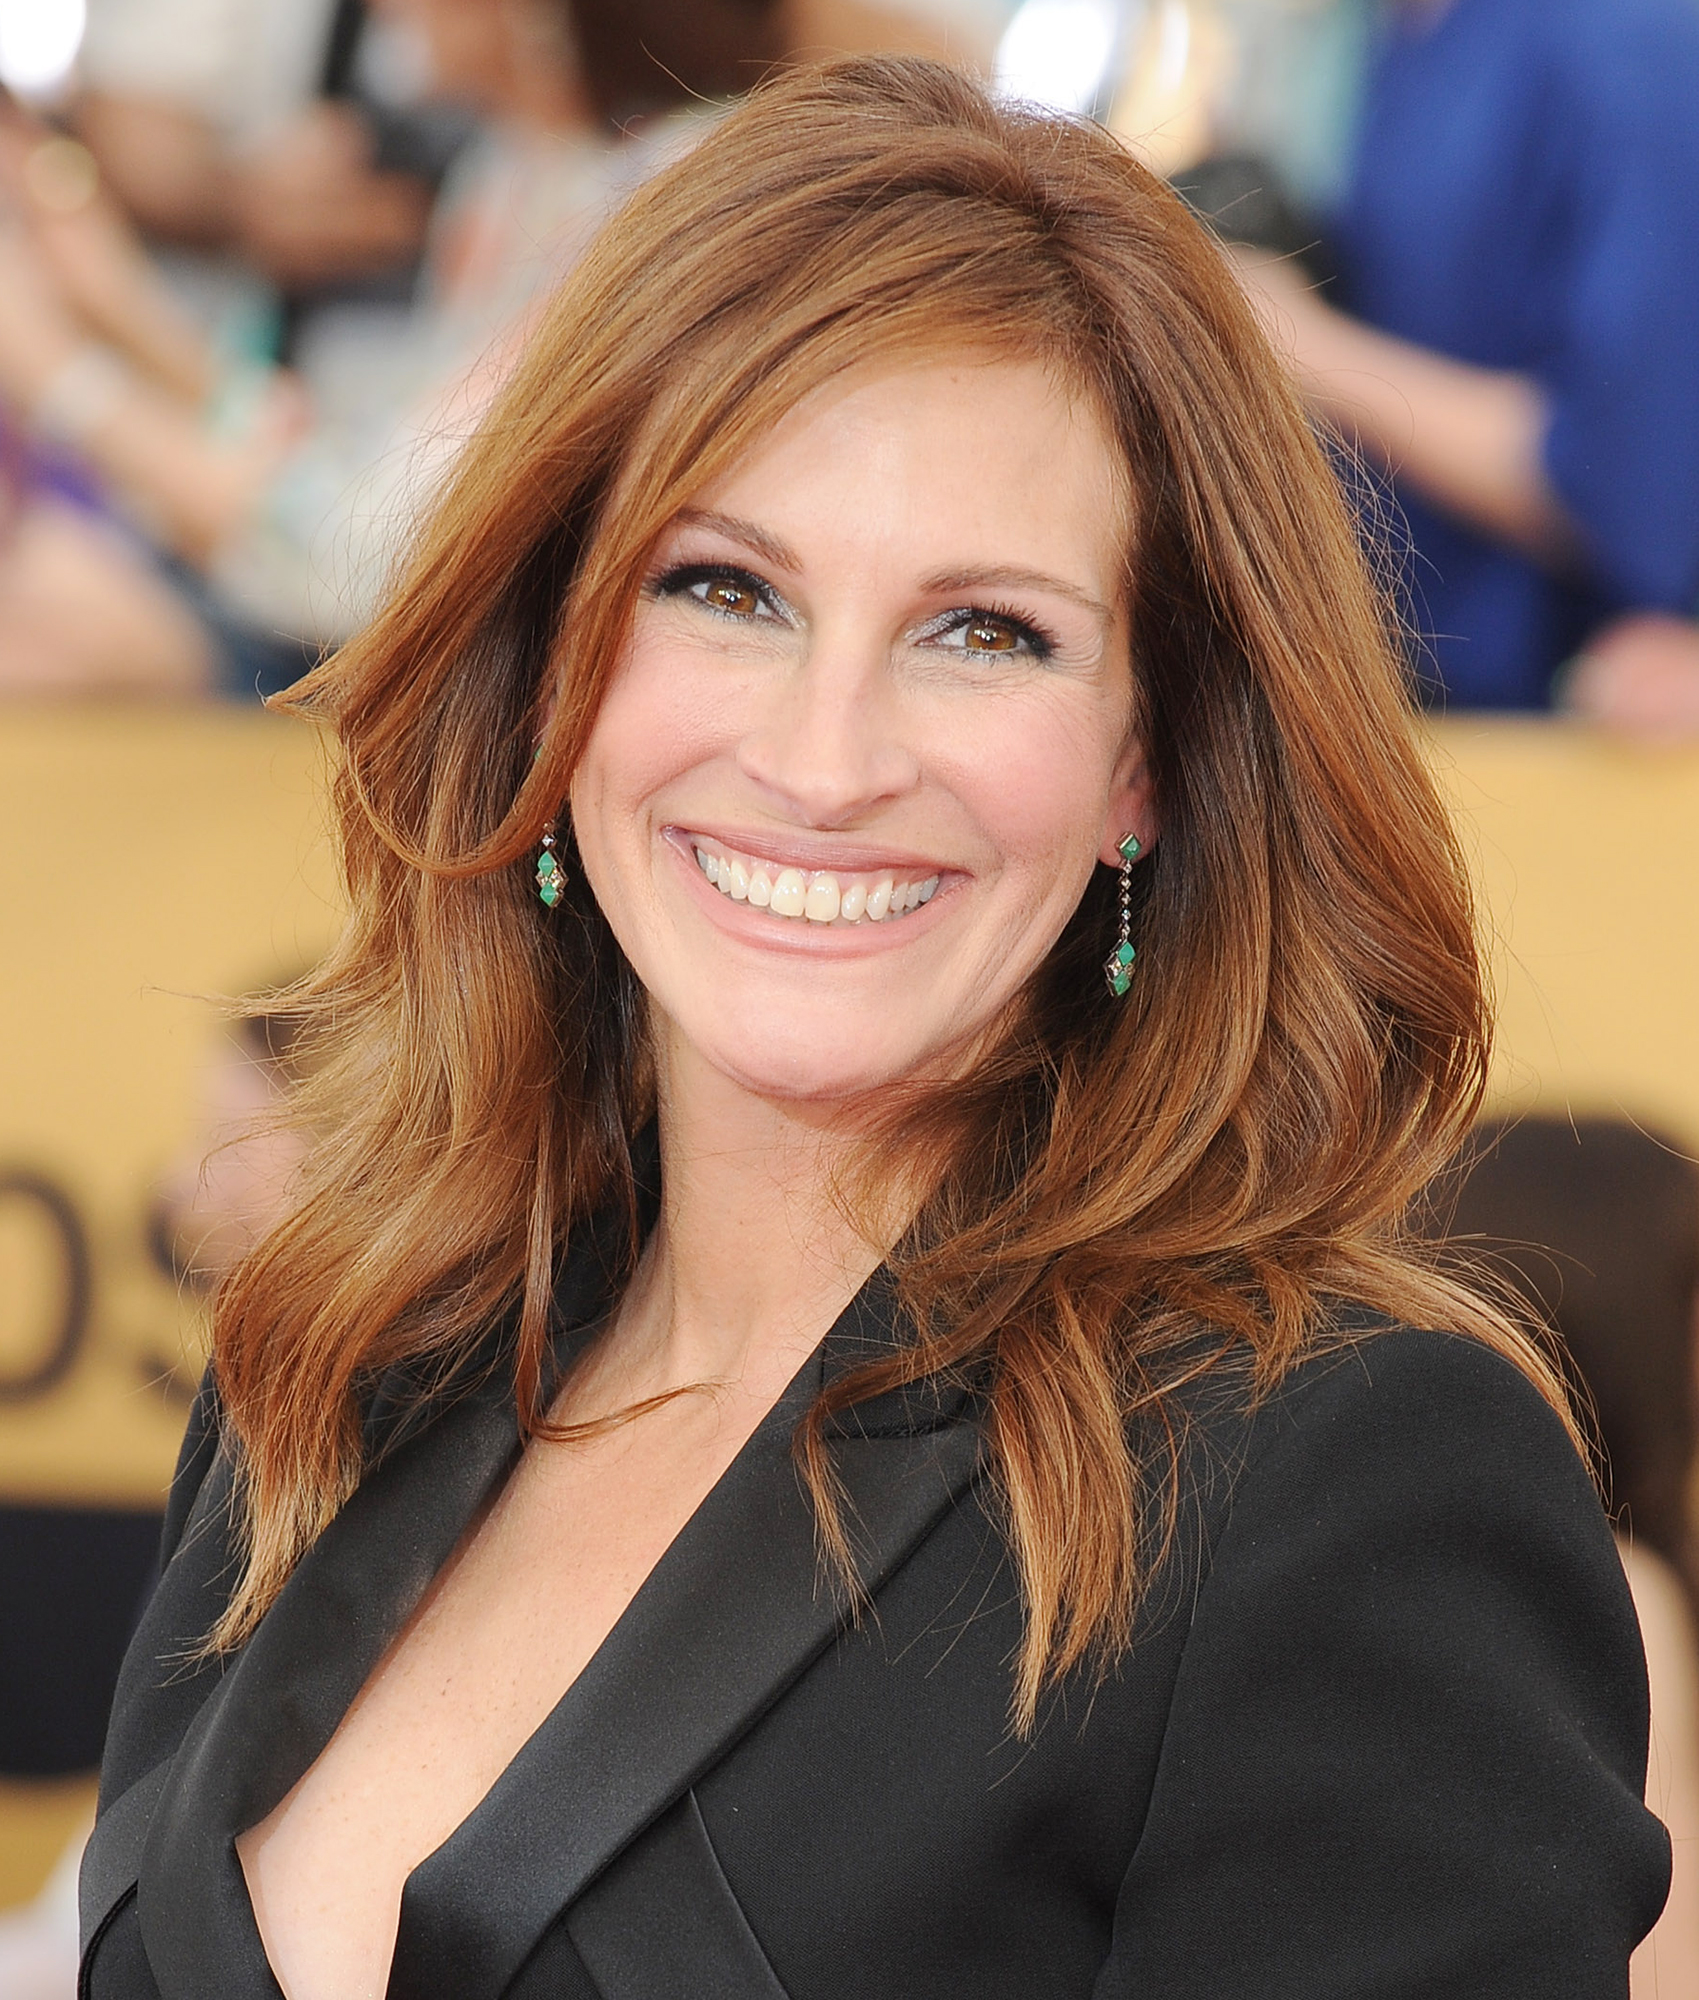 https://static.wikia.nocookie.net/the-voice-of-nick/images/8/80/Julia-roberts-31.jpg/revision/latest?cb=20190415012326